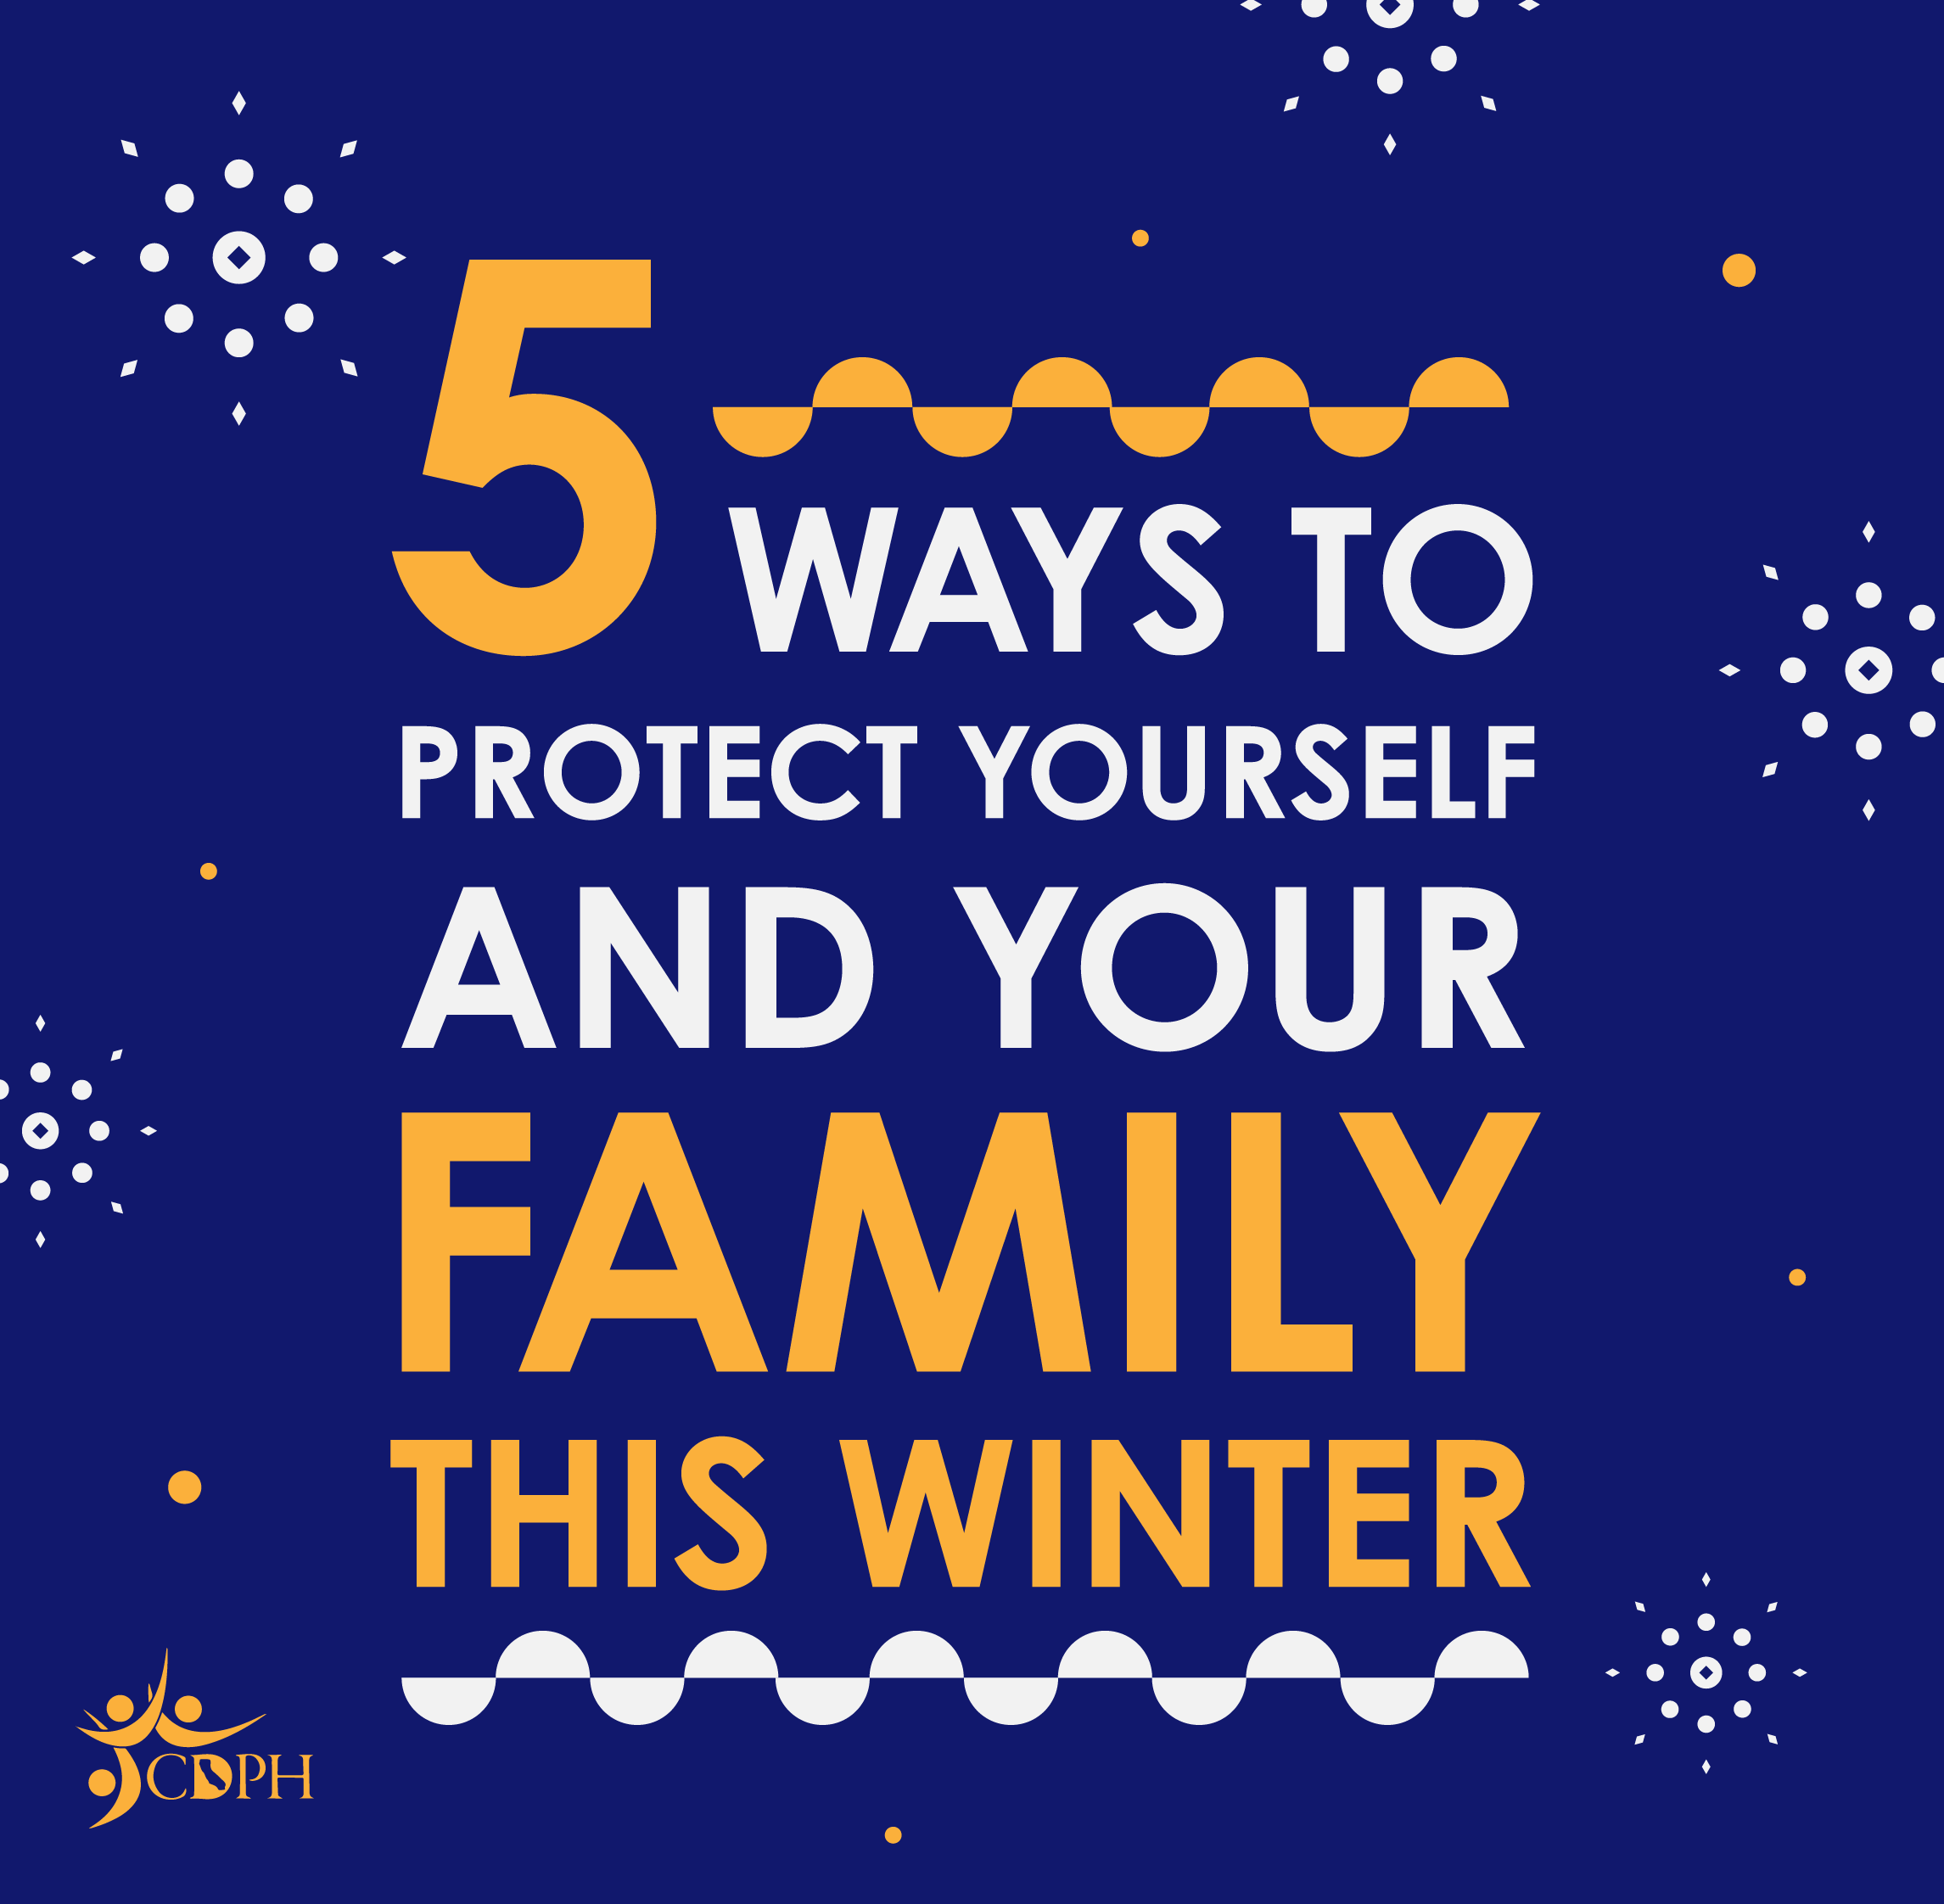 5 ways to protect yourself and your family this winter